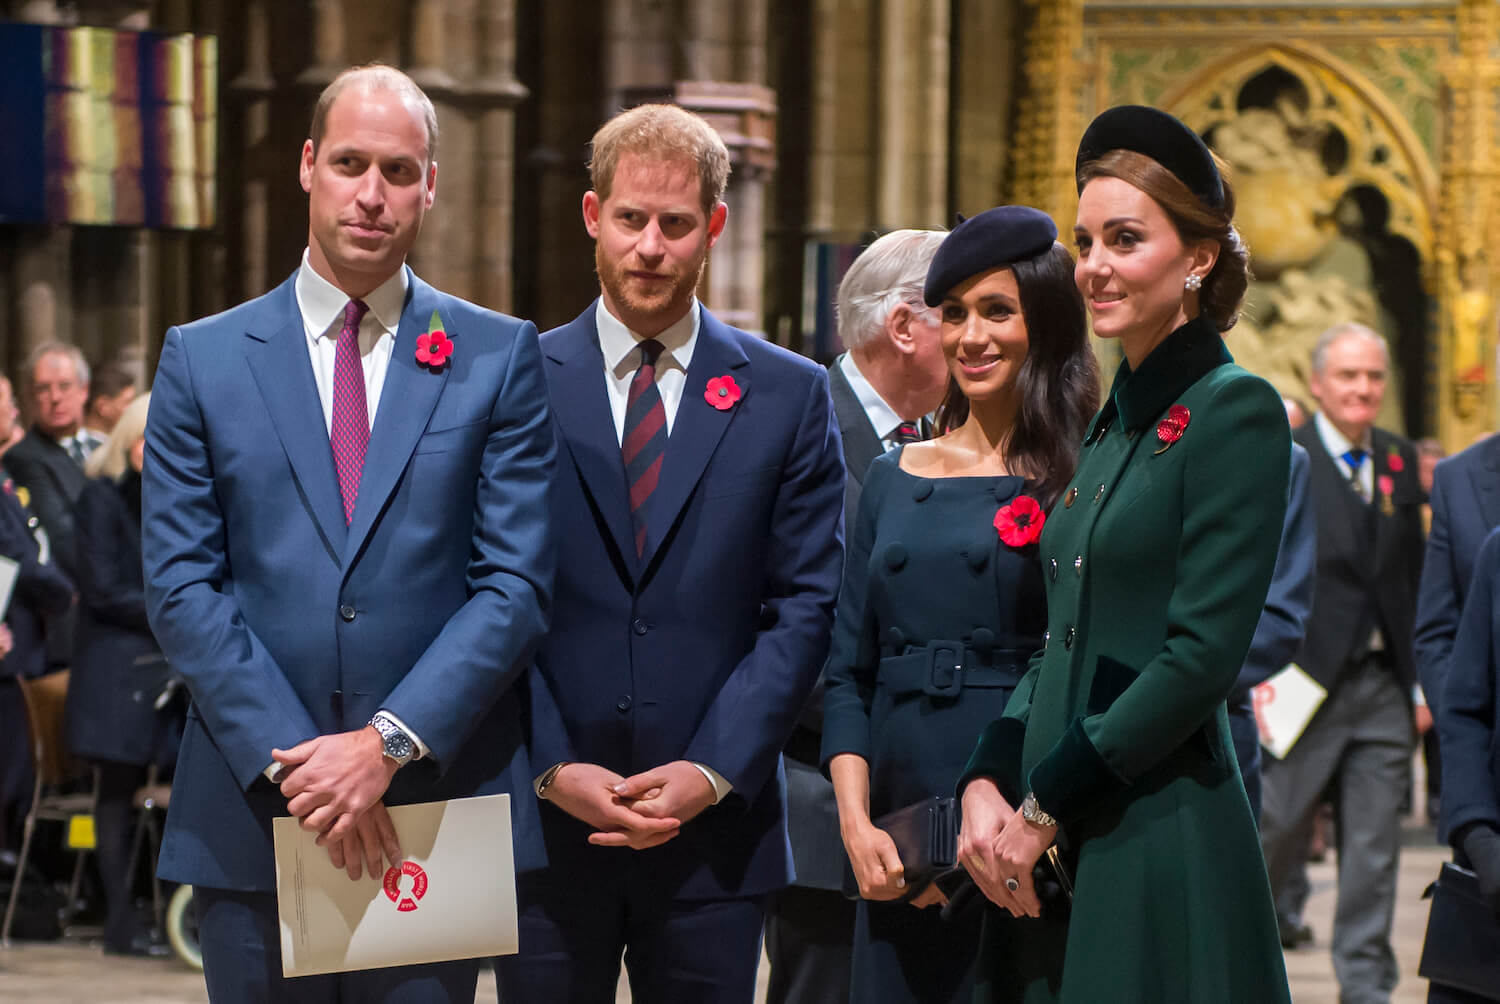 Prince Harry and Prince William with their wives Meghan Markle and Kate Middleton